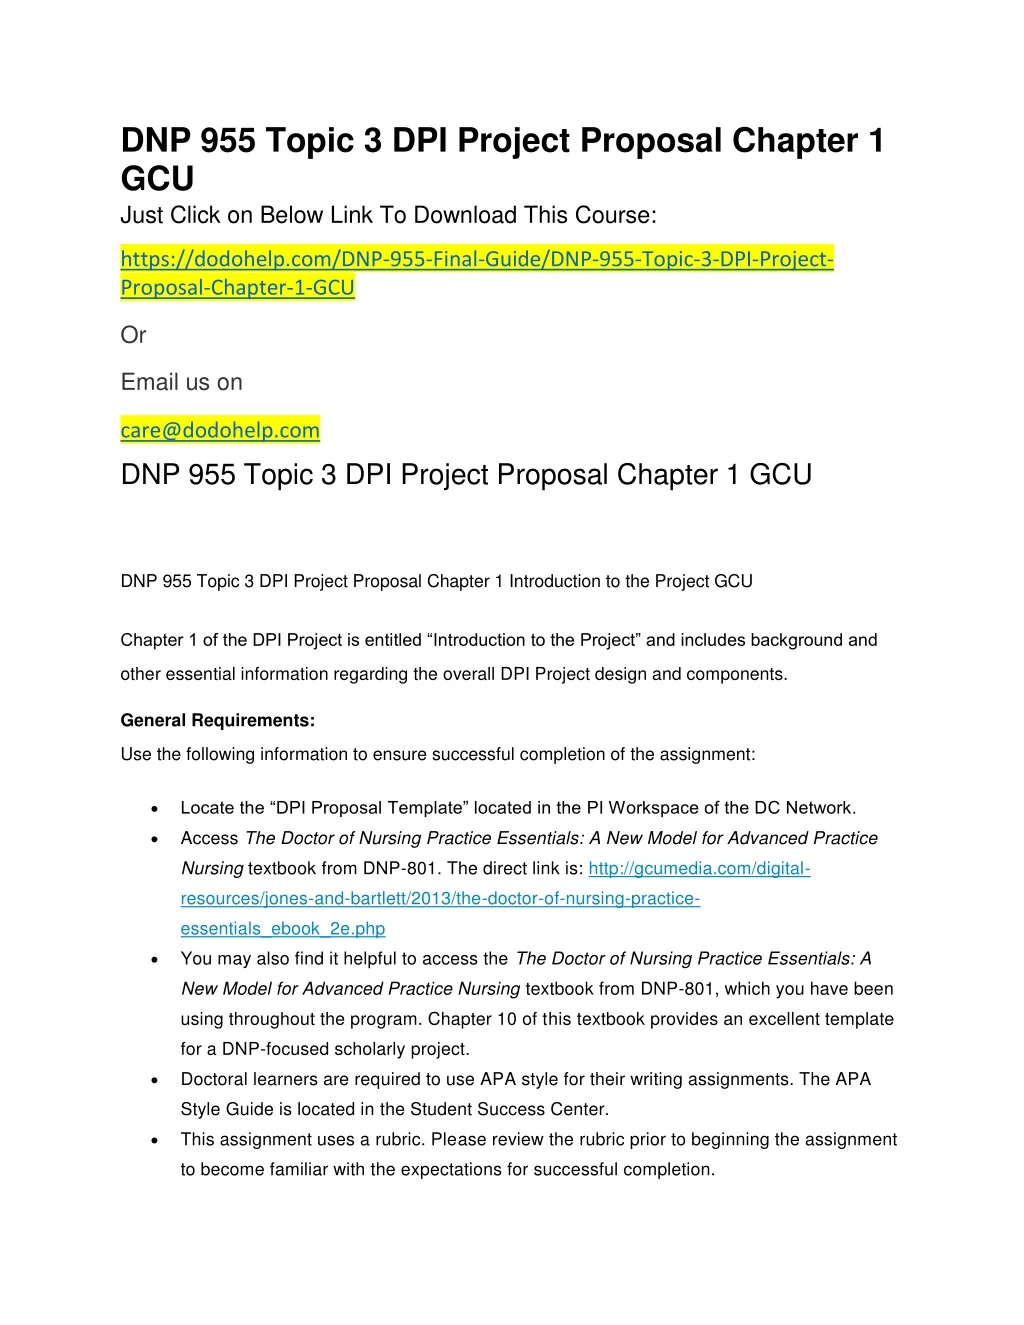 dnp 955 topic 3 dpi project proposal chapter